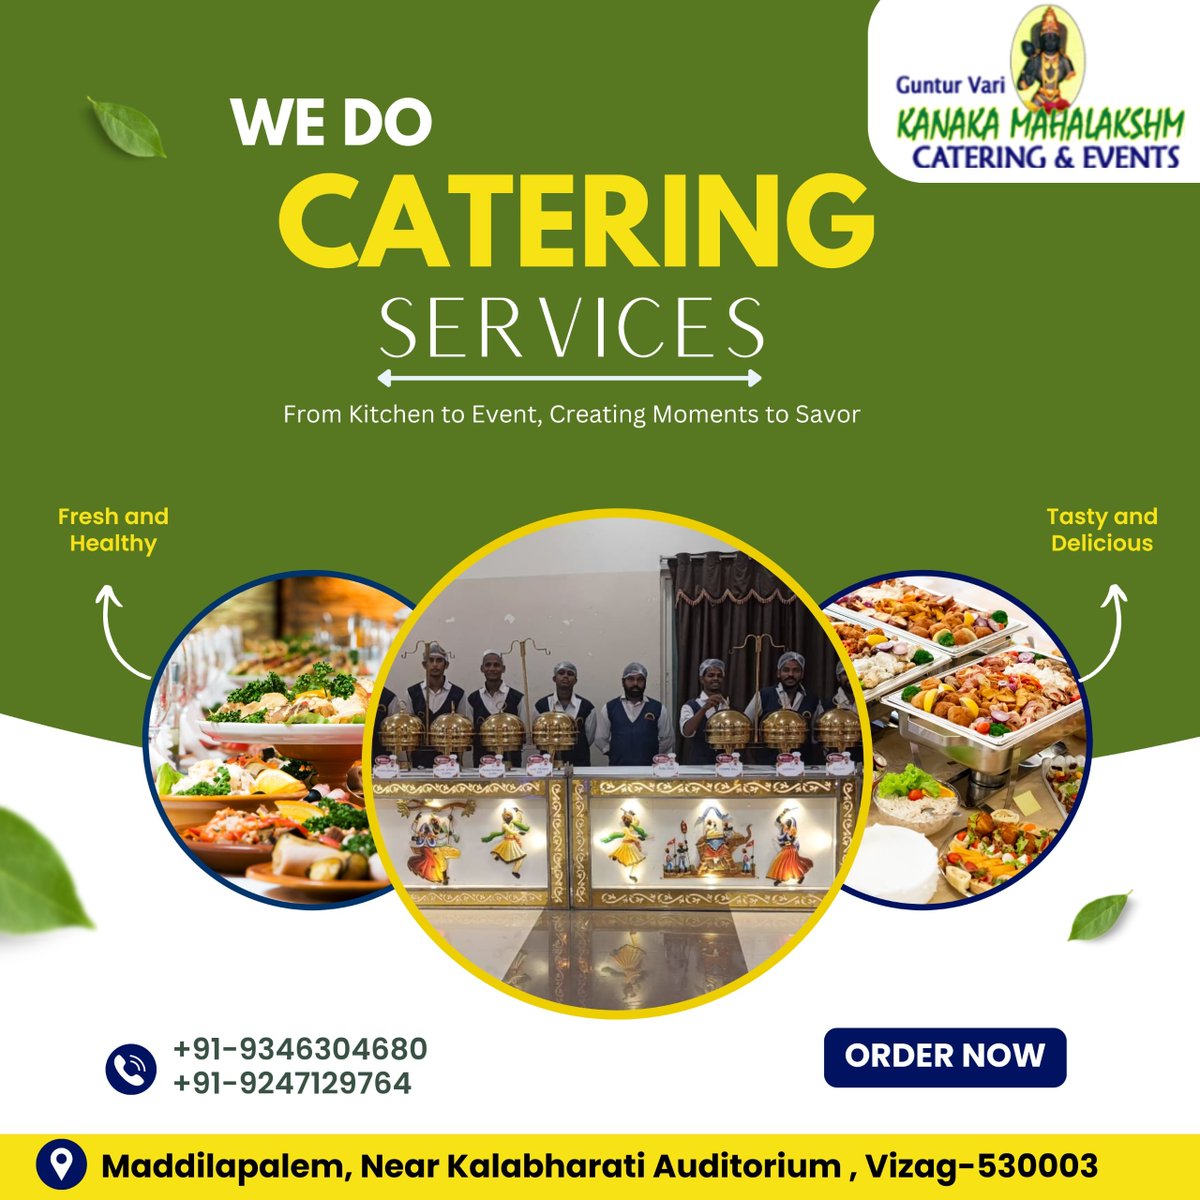 🍽️ **AGNAG Catering Services** 🍽️  
From Kitchen to Event, Creating Moments to Savor!  

📞 **Order Now:**  
+91-9346304680 | +91-9247129764  

📍 **Location:**  
Maddilapalem, Near Kalabharati Auditorium, Vizag-530003  

#CateringServices #EventCatering #VizagCatering #Fresh